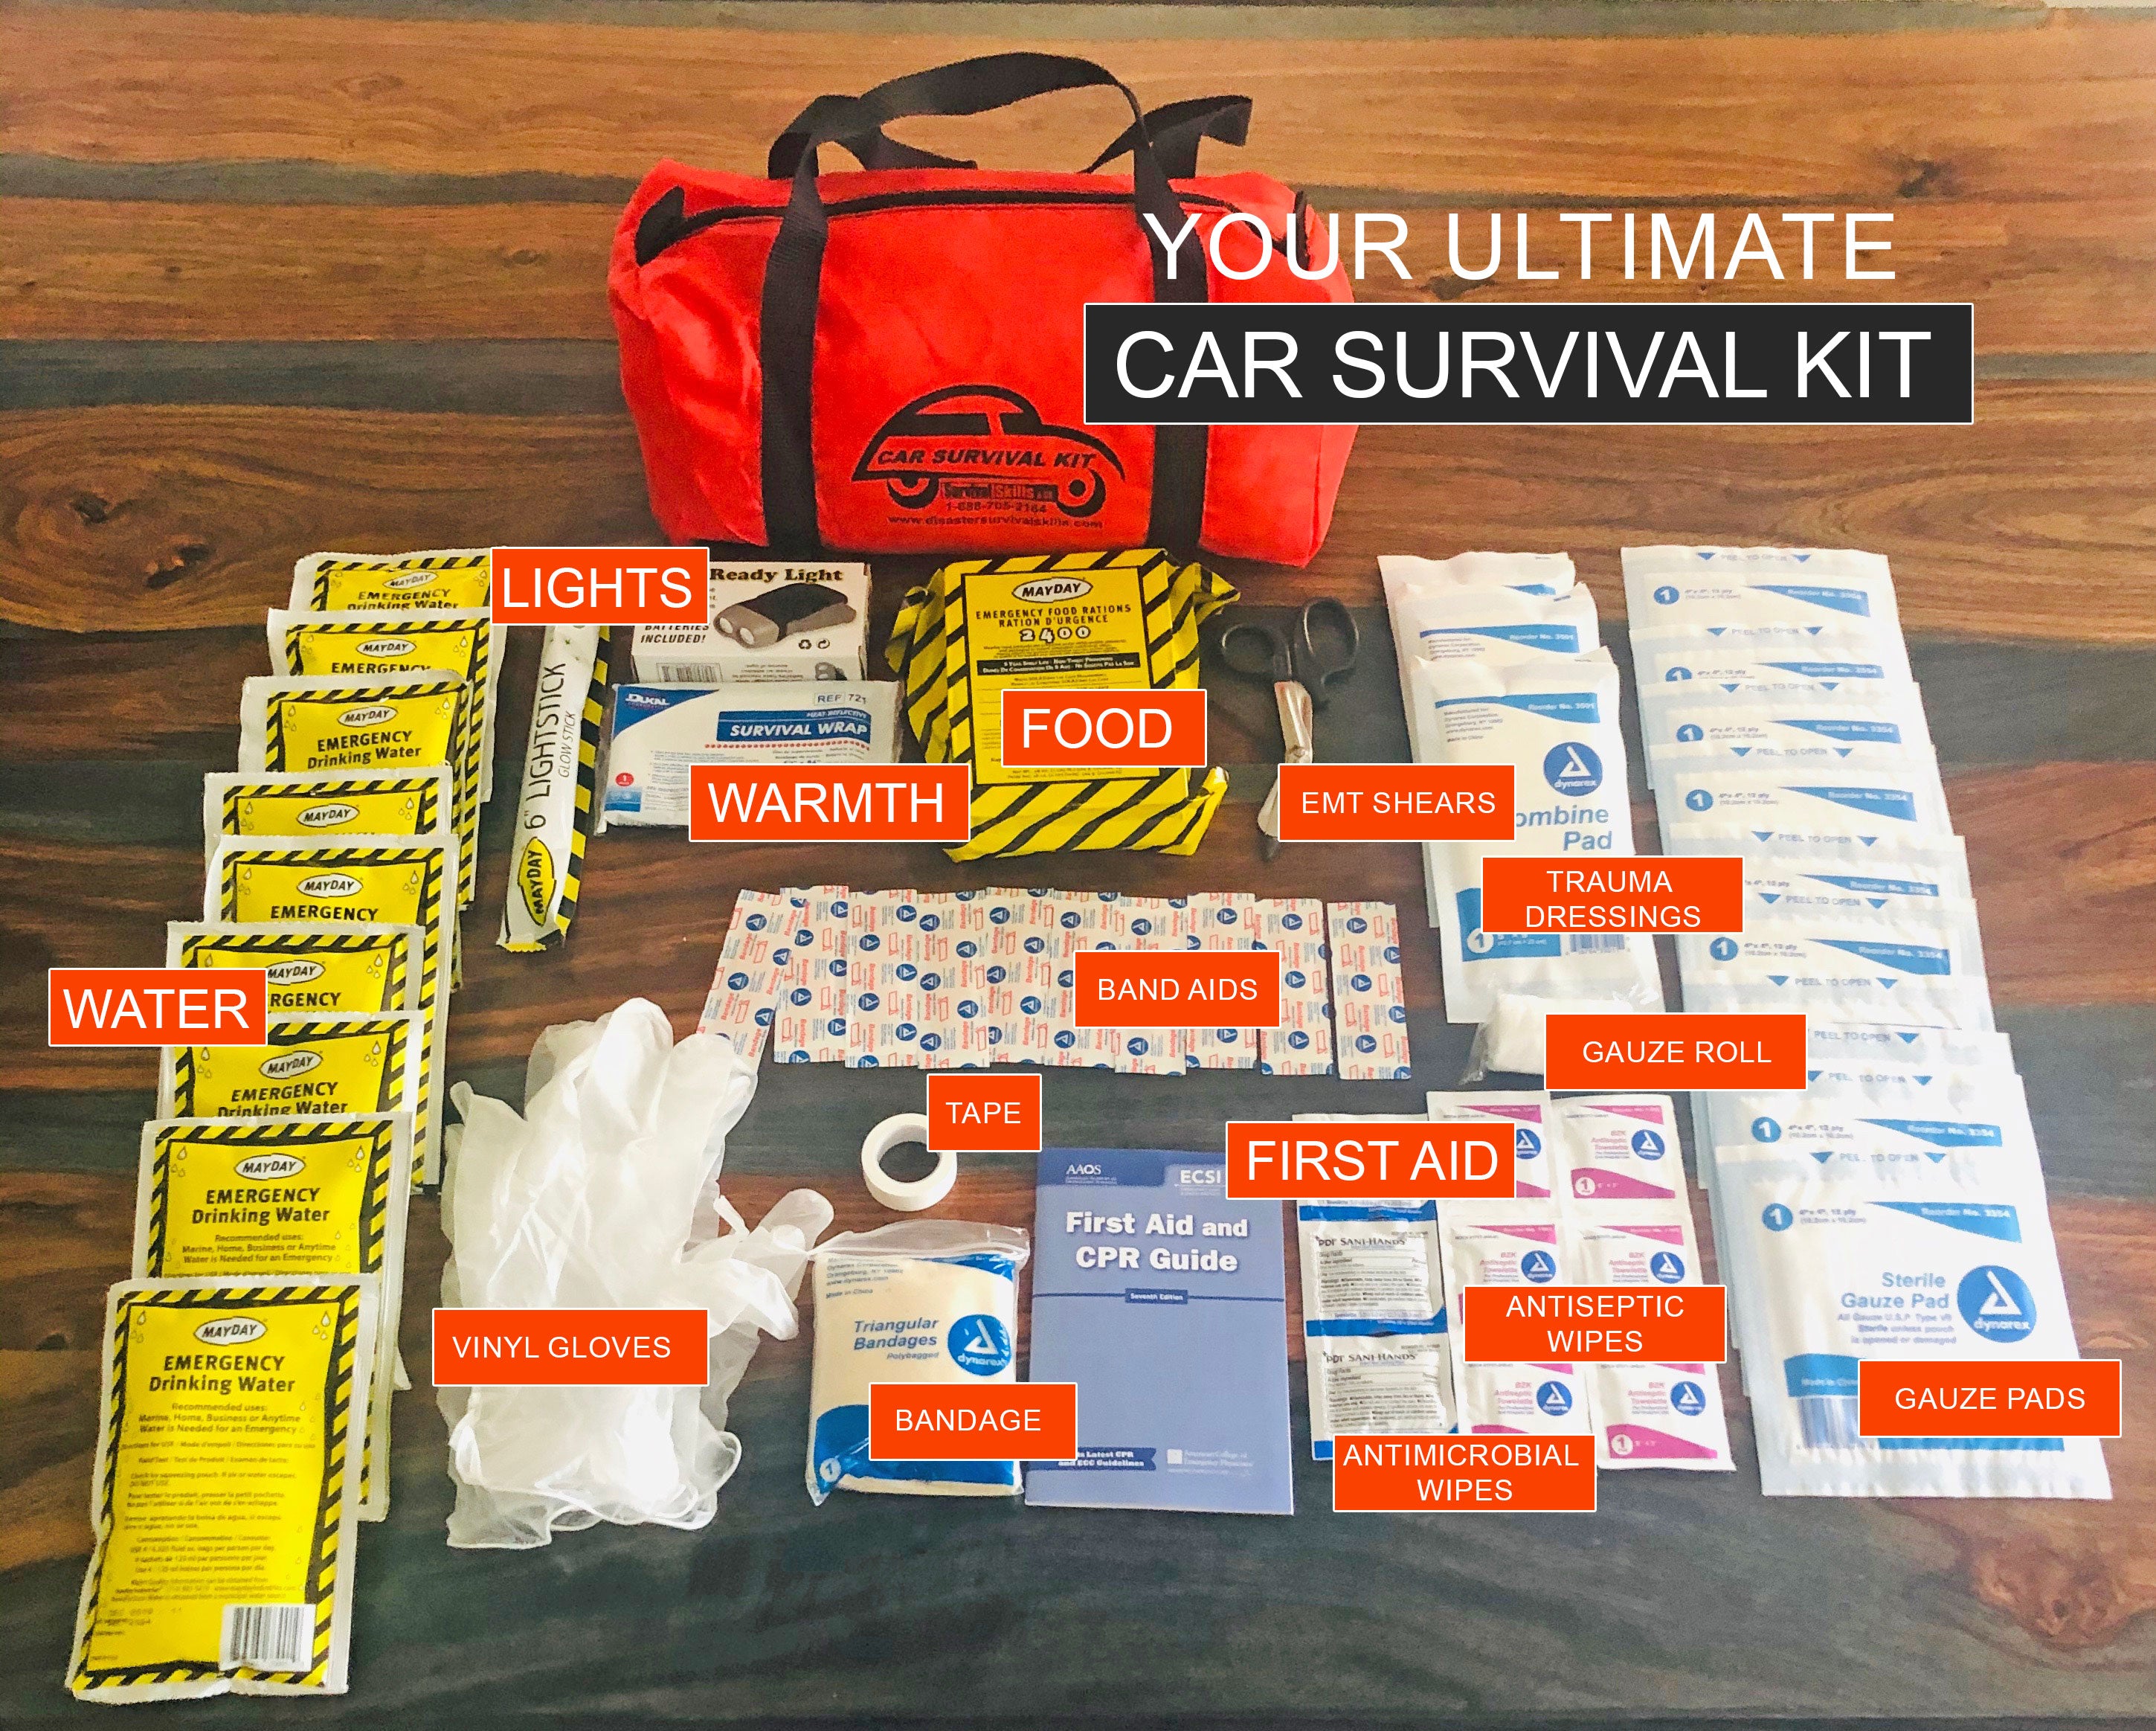 Be Ready for Anything: Packing Emergency Supplies for Travel